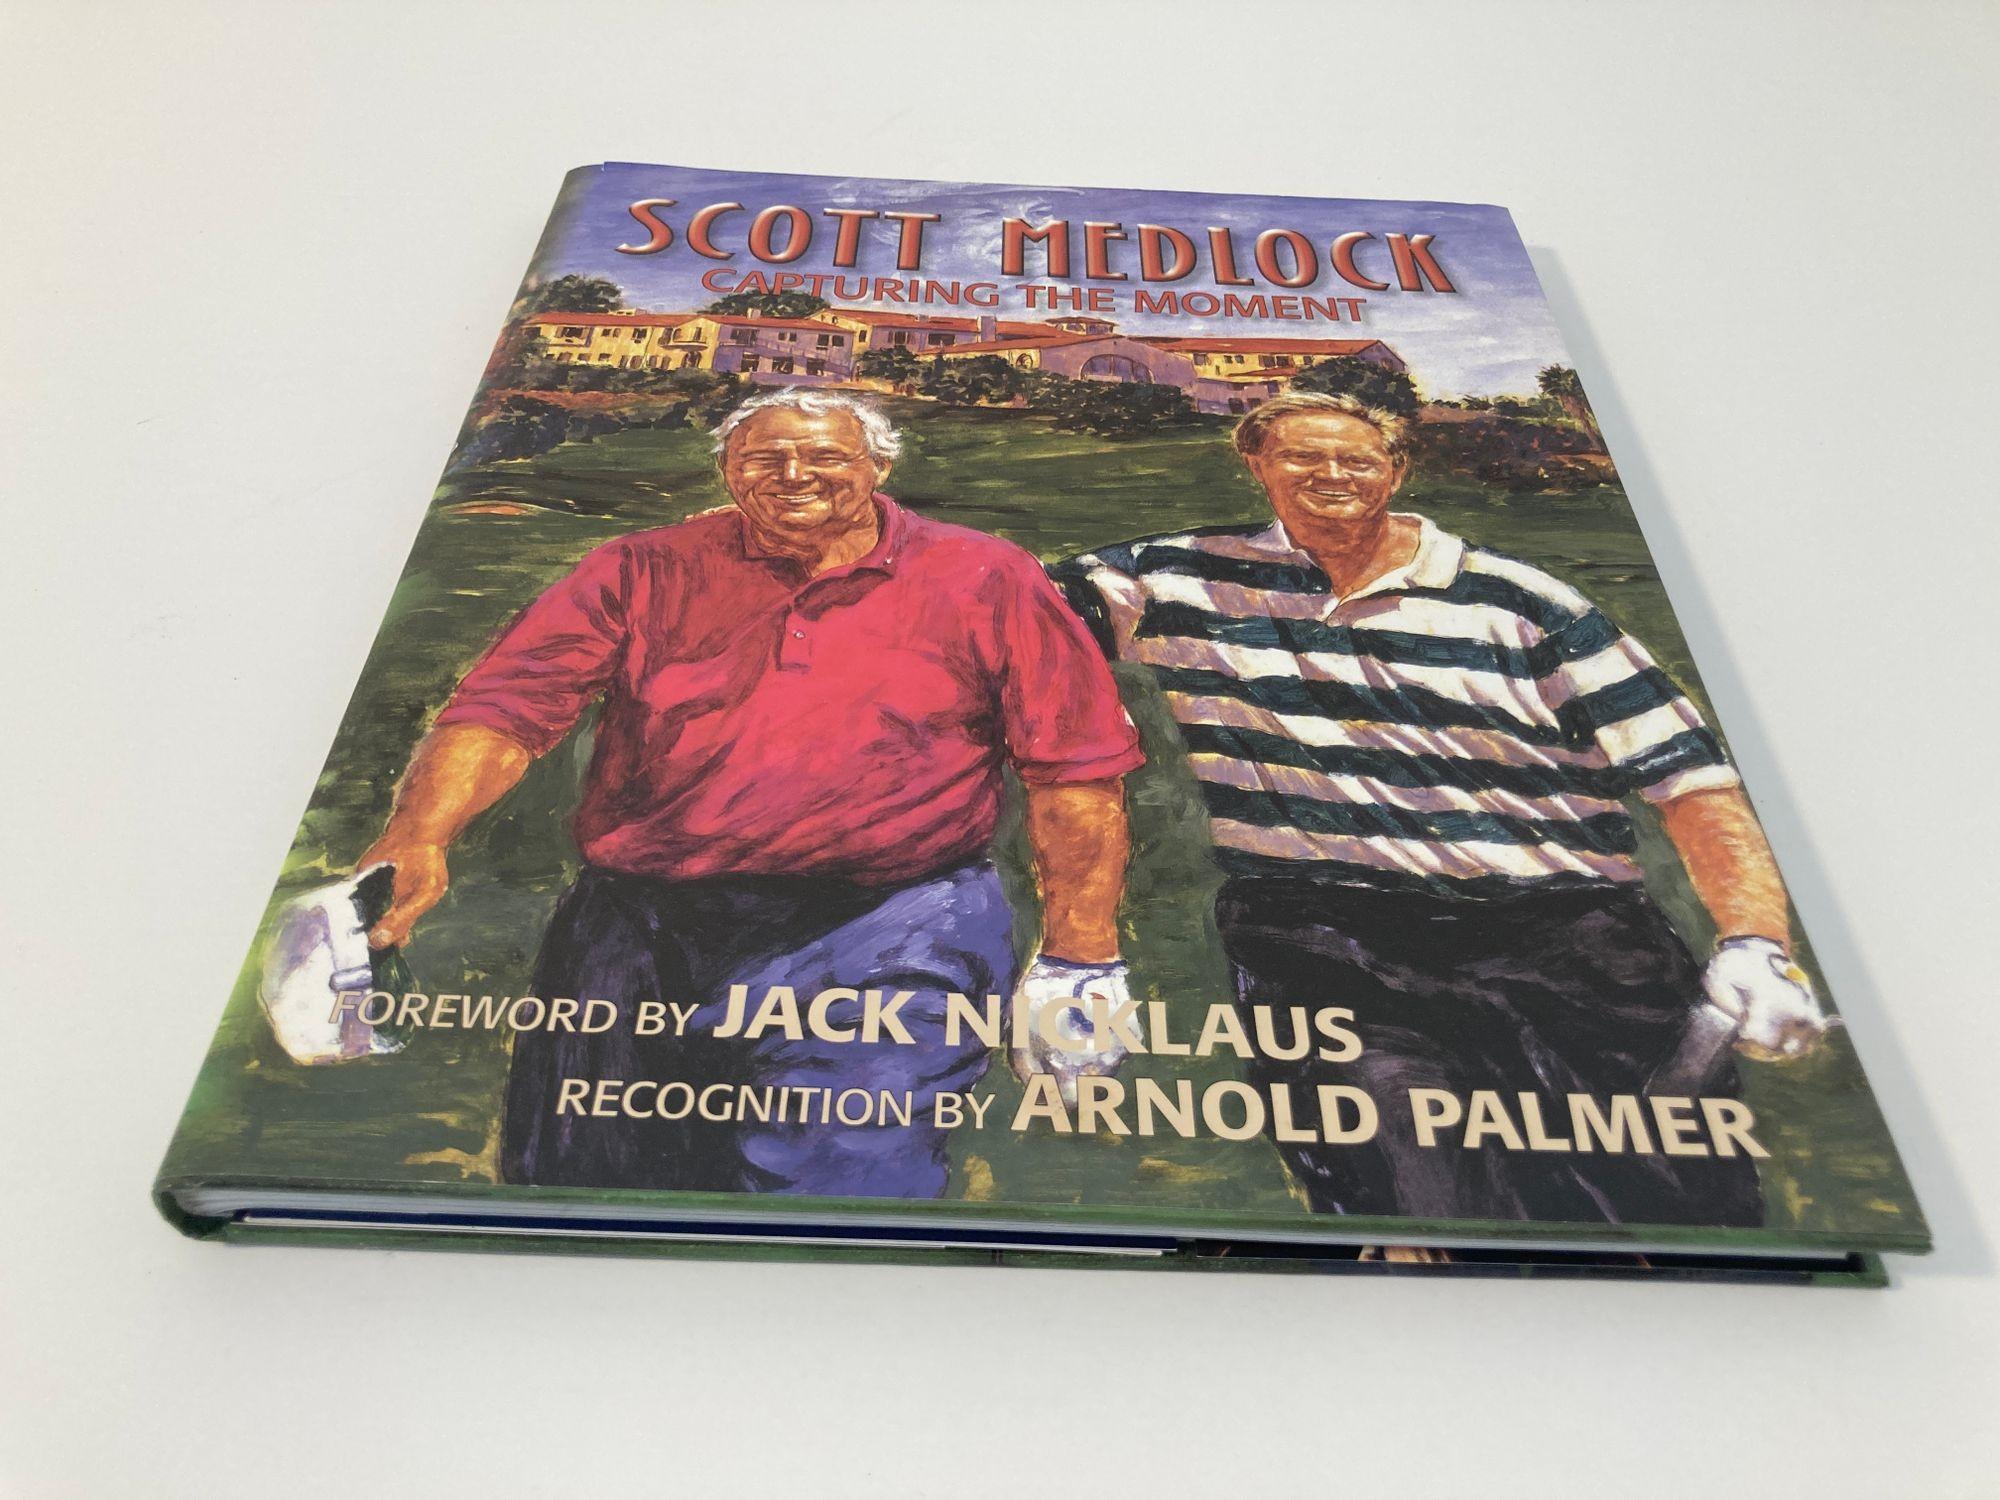 Scott Medlock Capturing the Moment Hardcover Book 2010. Book is signed and autographed by SCOTT MEDLOCK.
As one of the worlds foremost artists, Scott Medlock has teamed with and painted many of the greatest names in sports history including golf